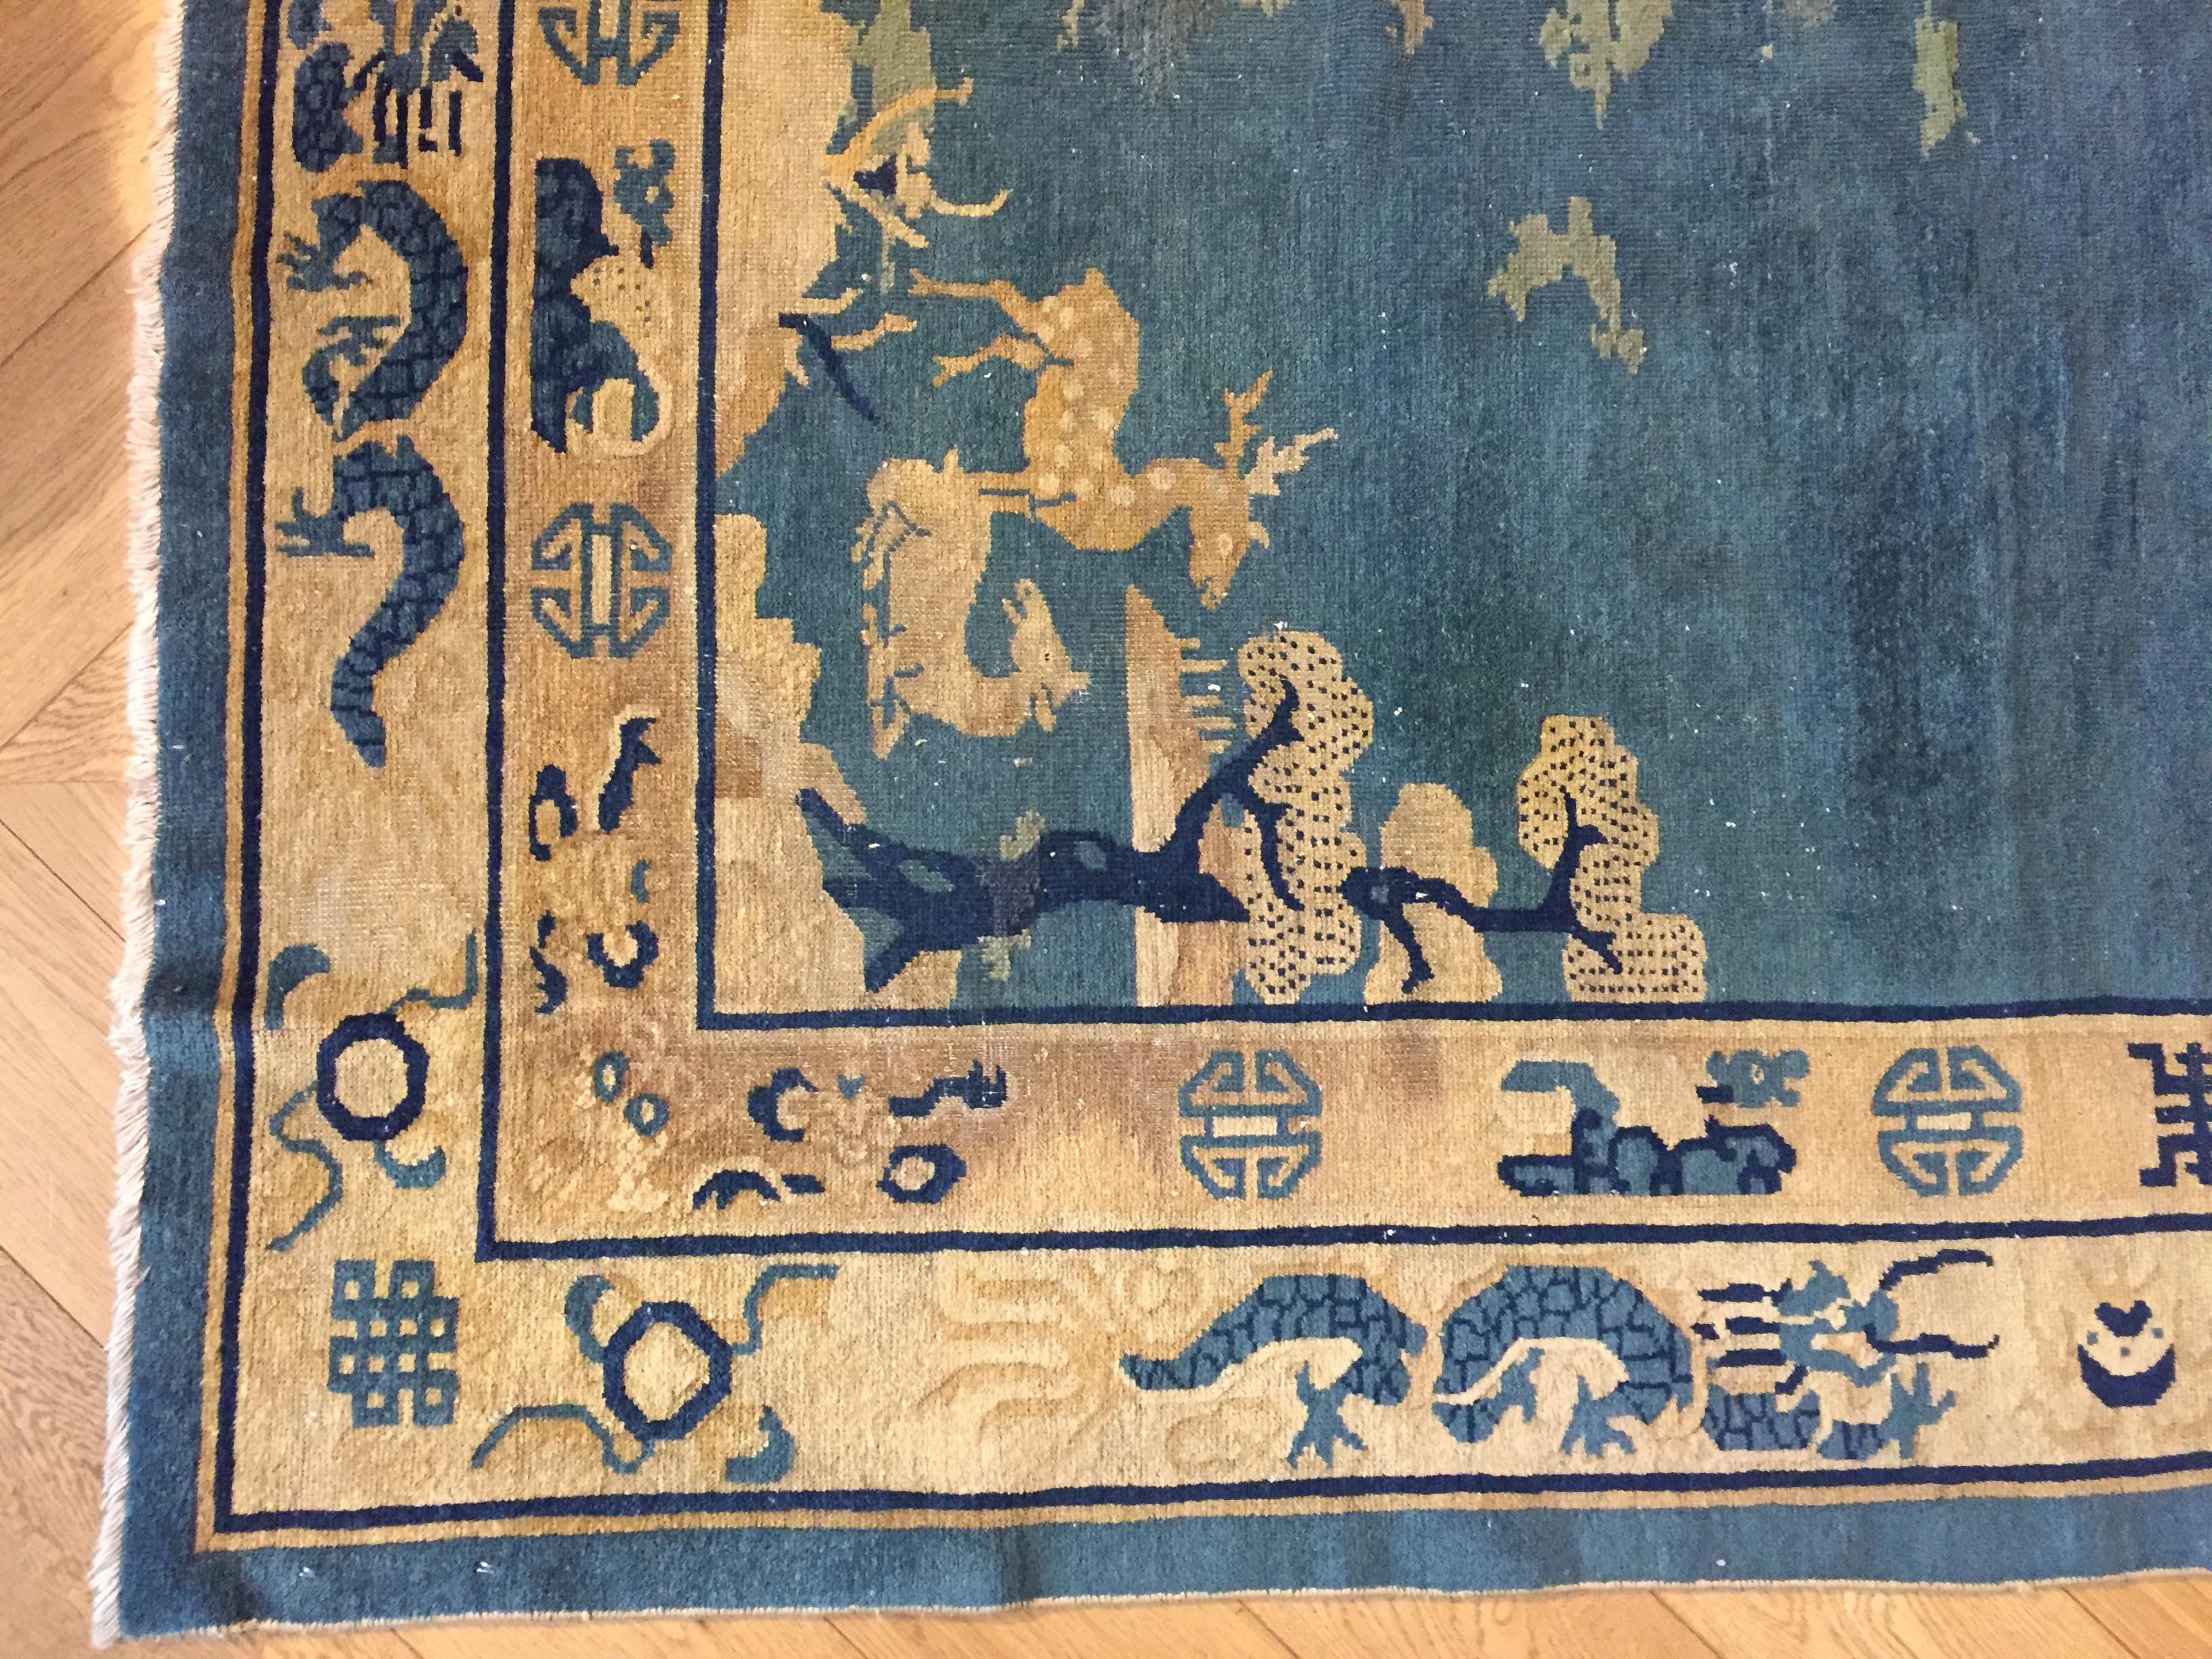 Chinoiserie 19th Century Peking Blu Rug with Longevity Deer and Dragons, ca 1870 For Sale